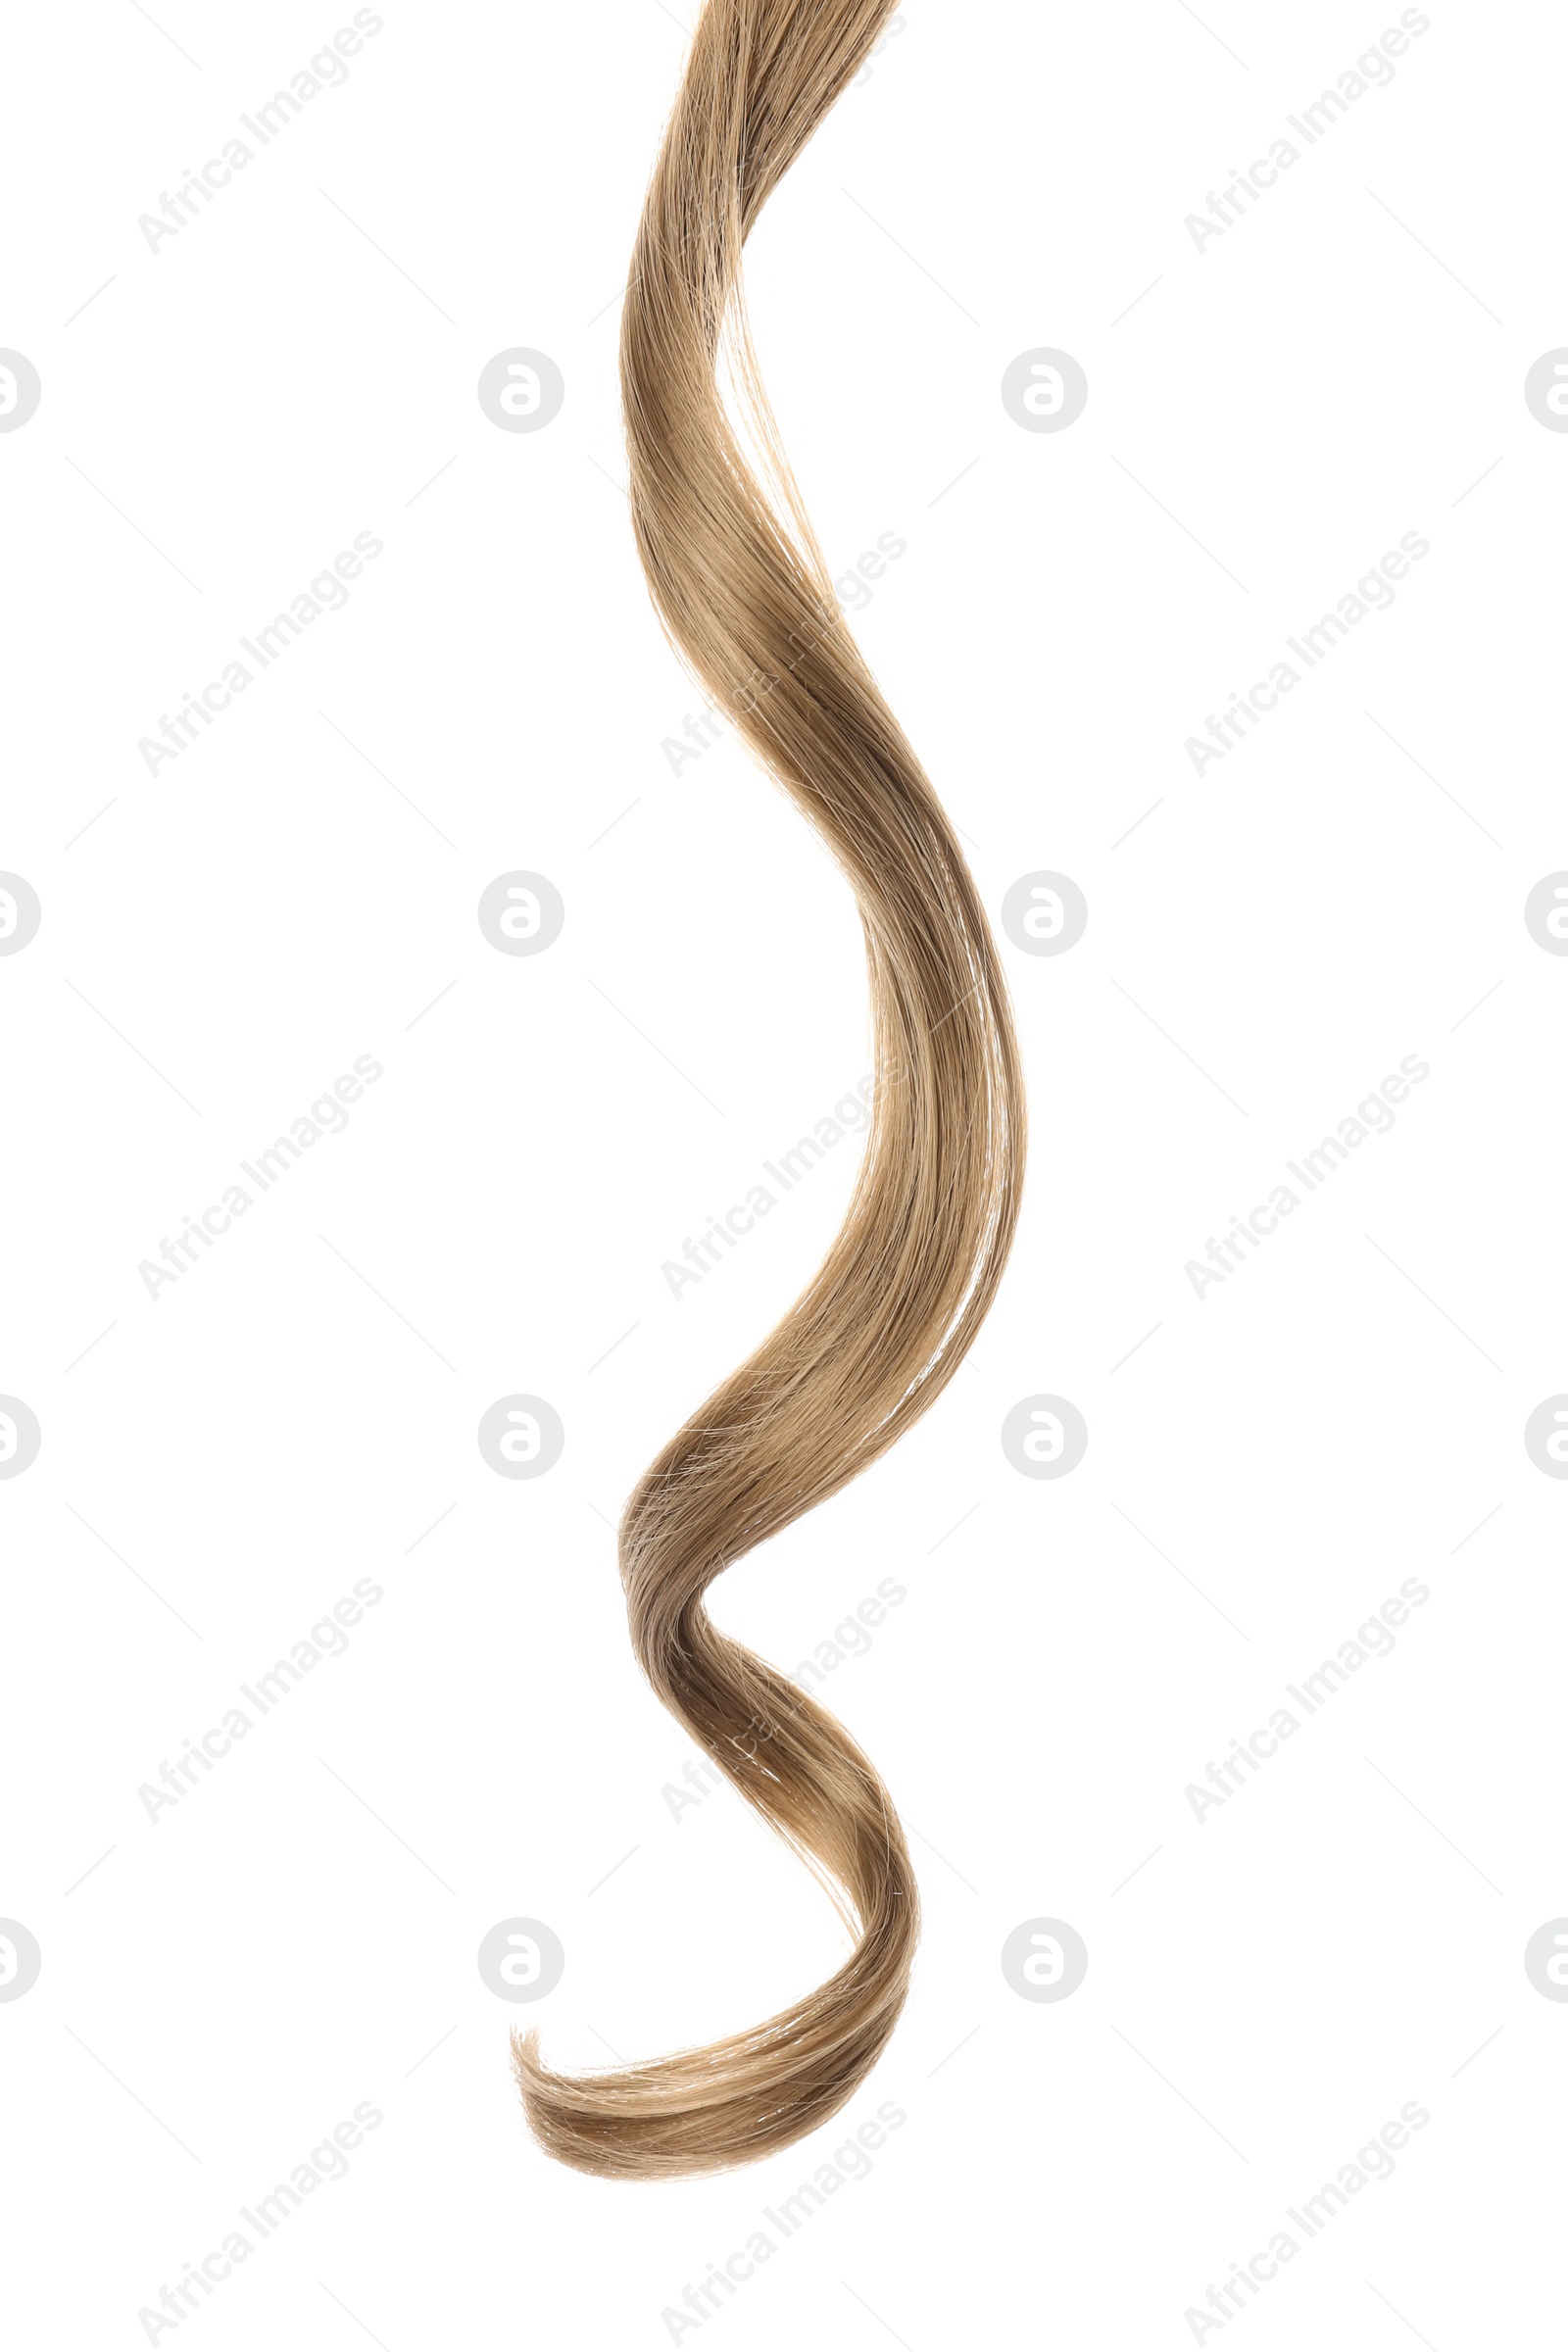 Photo of Lock of healthy hair on white background